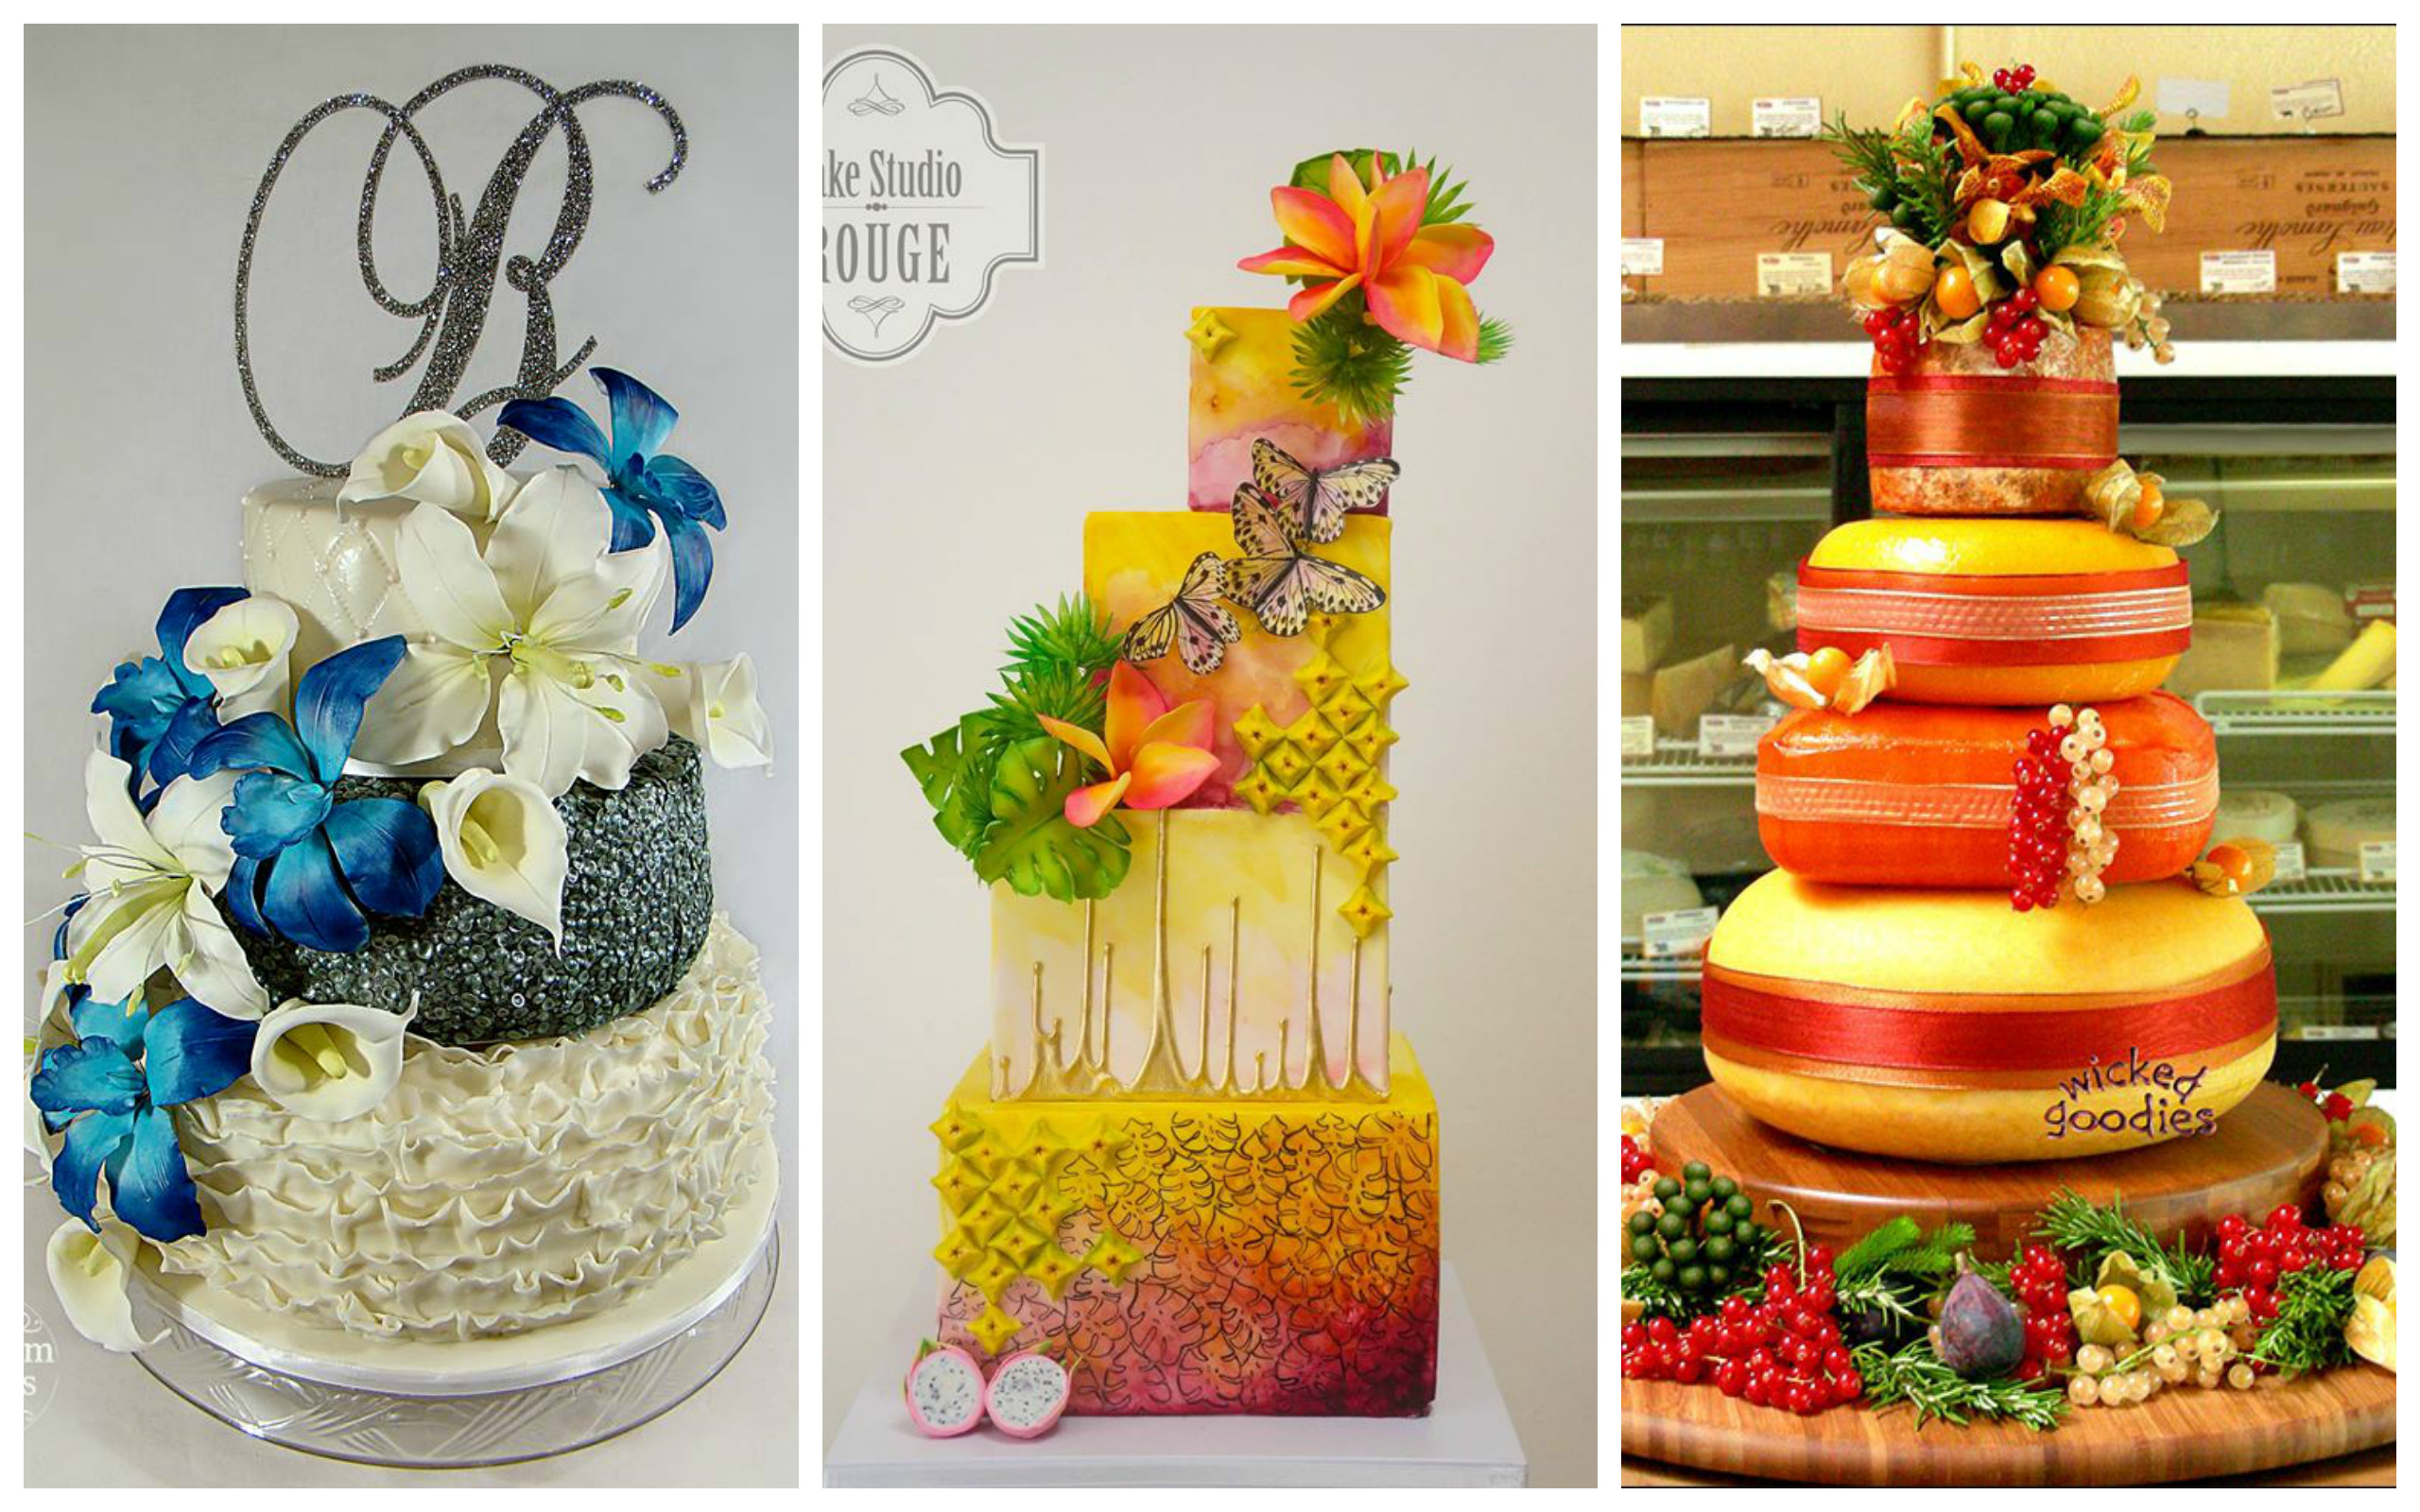 Competition: World's Spectacular Cake Artist